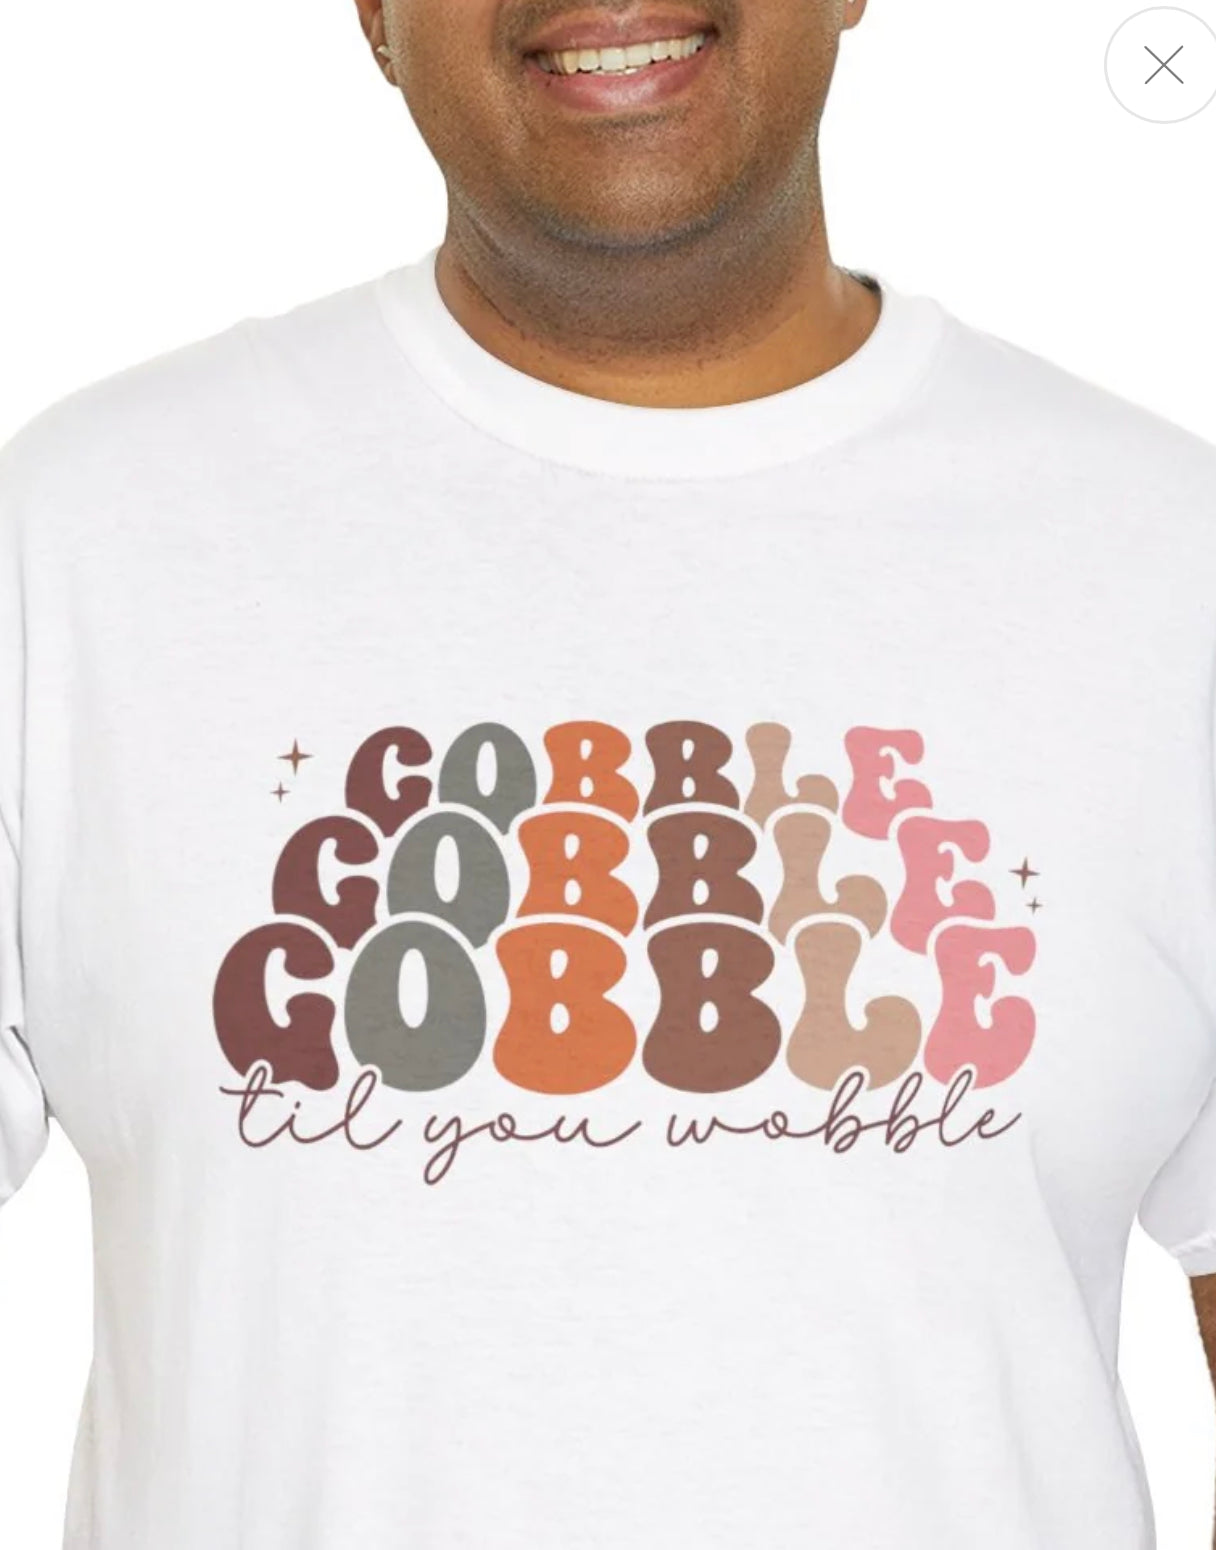 Gobble T-Shirt For Thanksgiving T Shirt For Funny Turkey Day TShirt For Sarcastic Holiday Tee